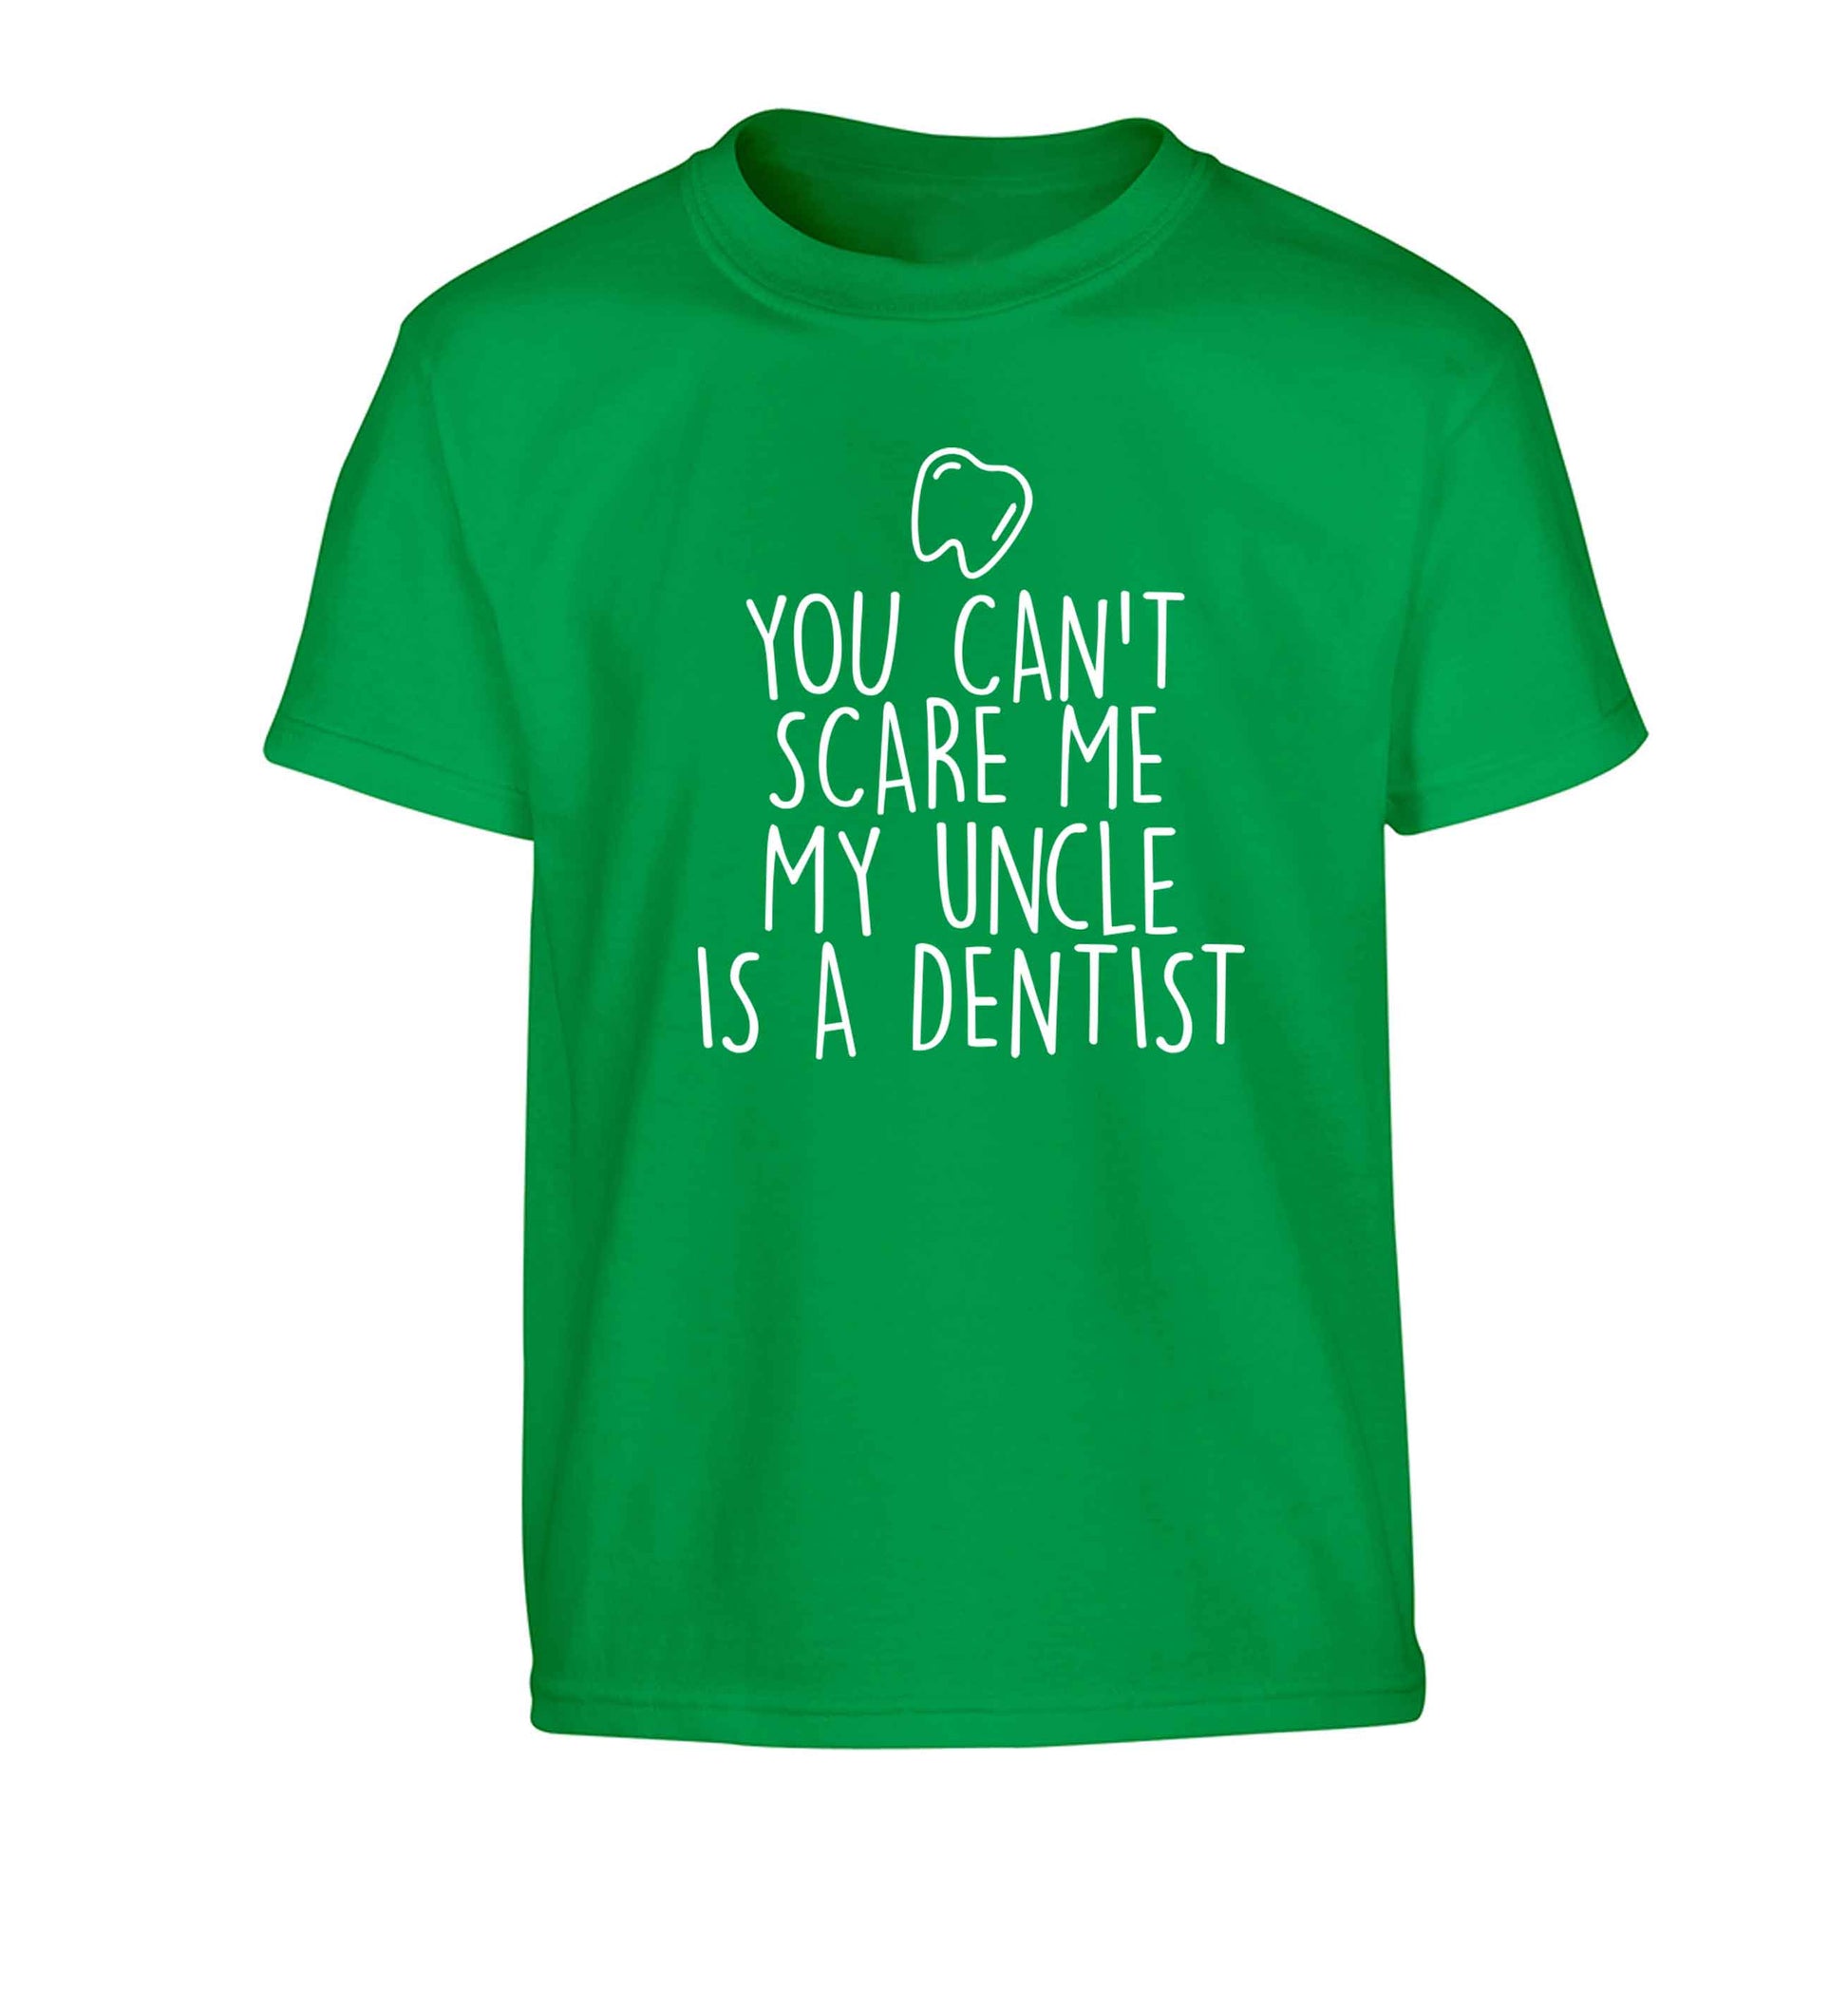 You can't scare me my uncle is a dentist Children's green Tshirt 12-13 Years